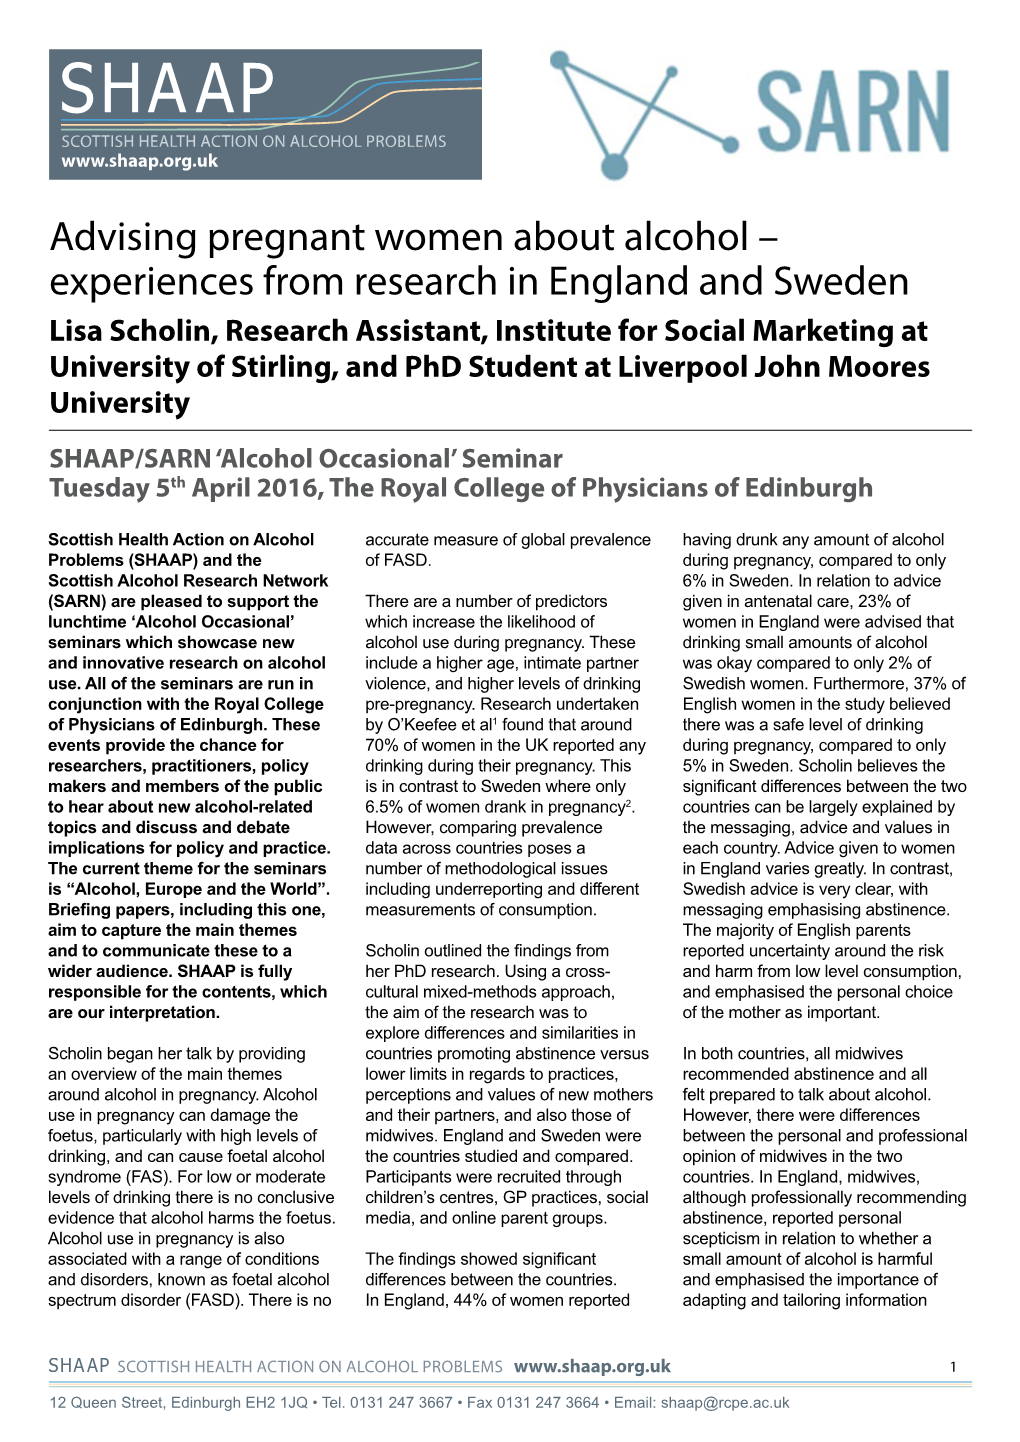 Advising Pregnant Women About Alcohol